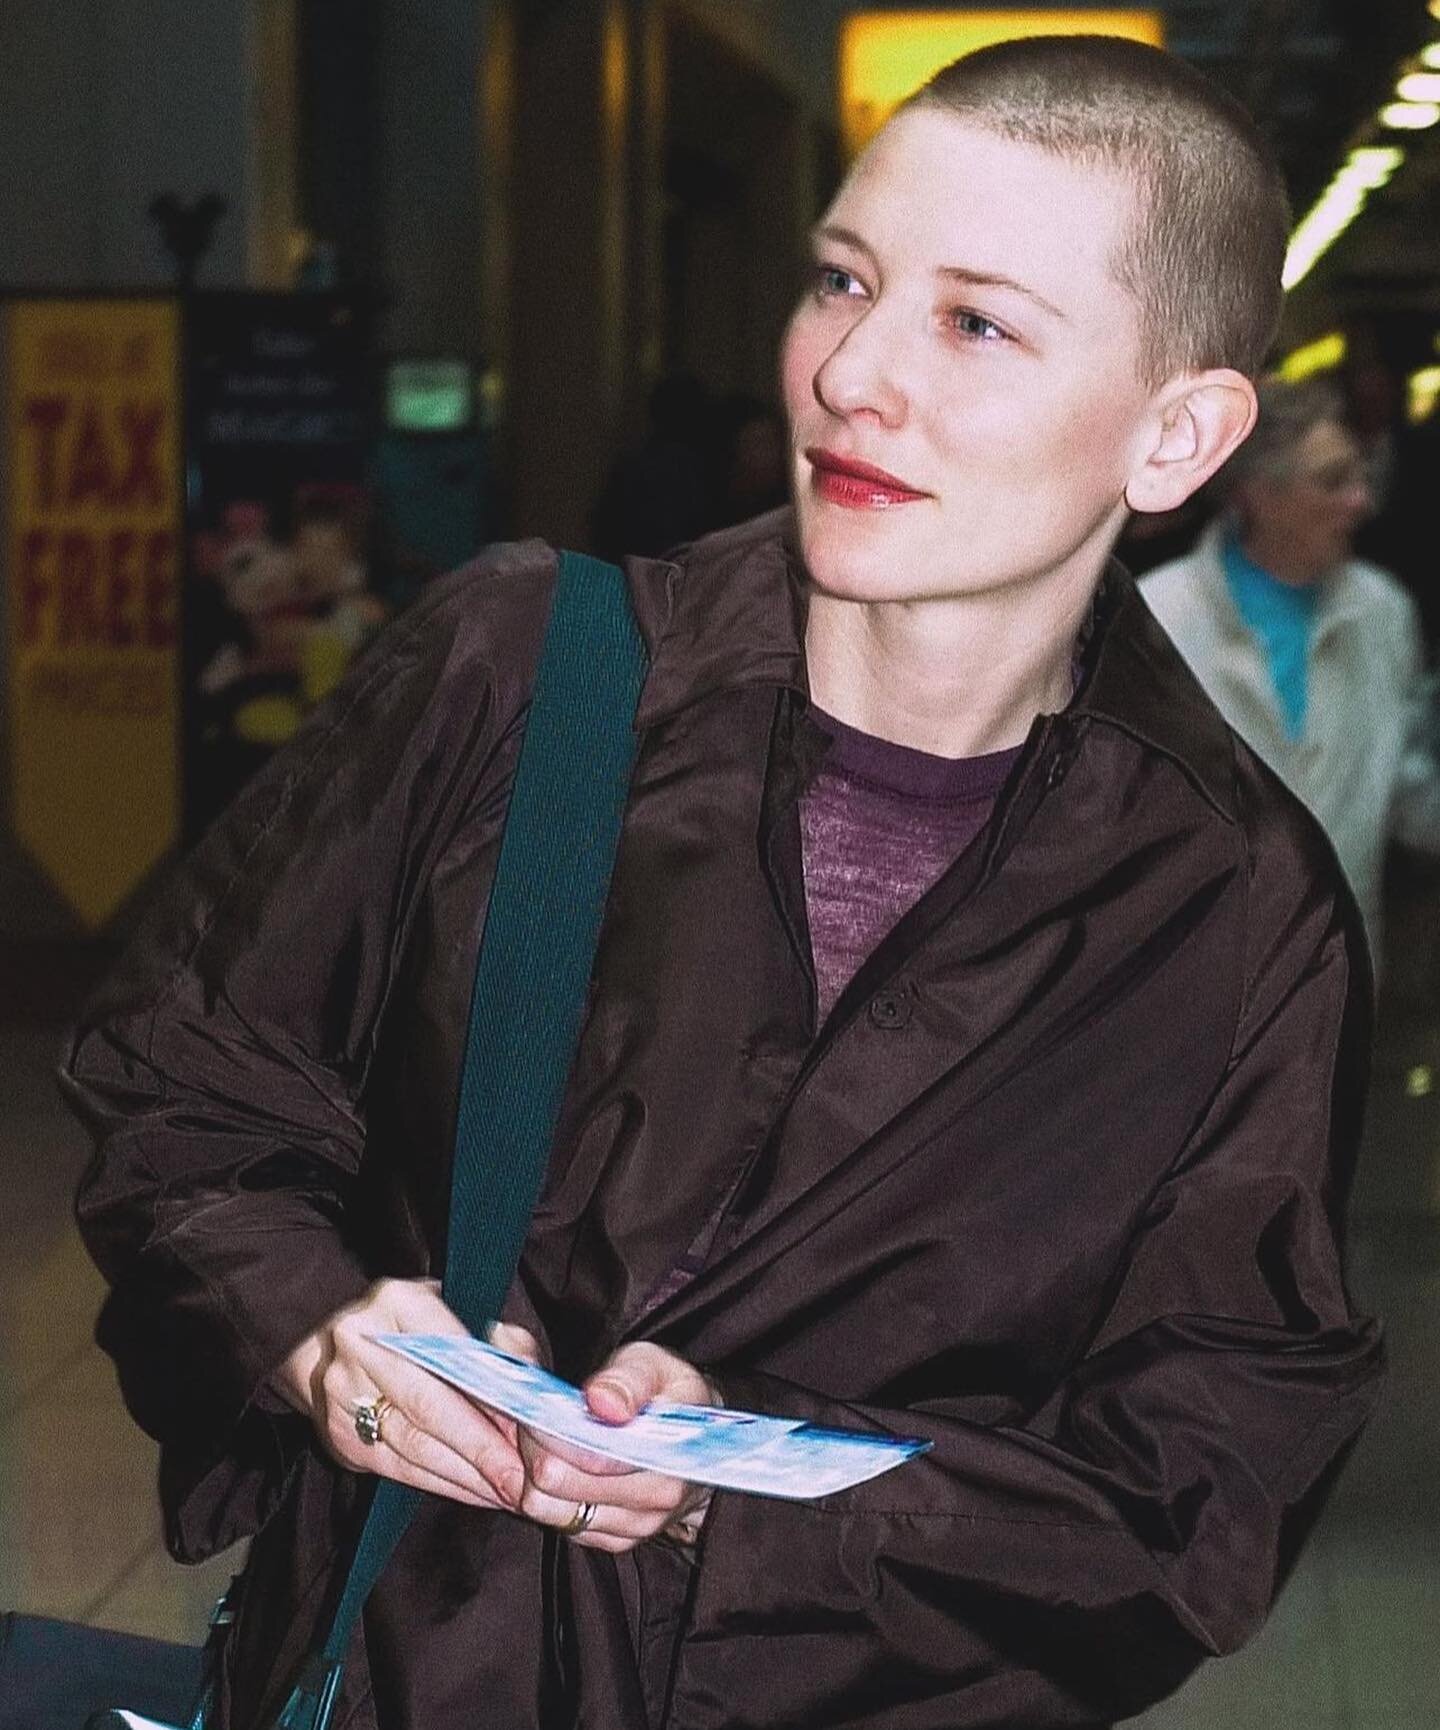 Friday Mood -keeping it simple~, #cateblanchett 2001 LAX

Quote of the day: &ldquo;what a strange girl you are, flung out of space&rdquo;. -carol
(from the film carol) #carolfilm #patriciahighsmith #priceofsalt 

#shavedhead #girlshavedhead #lesbianm